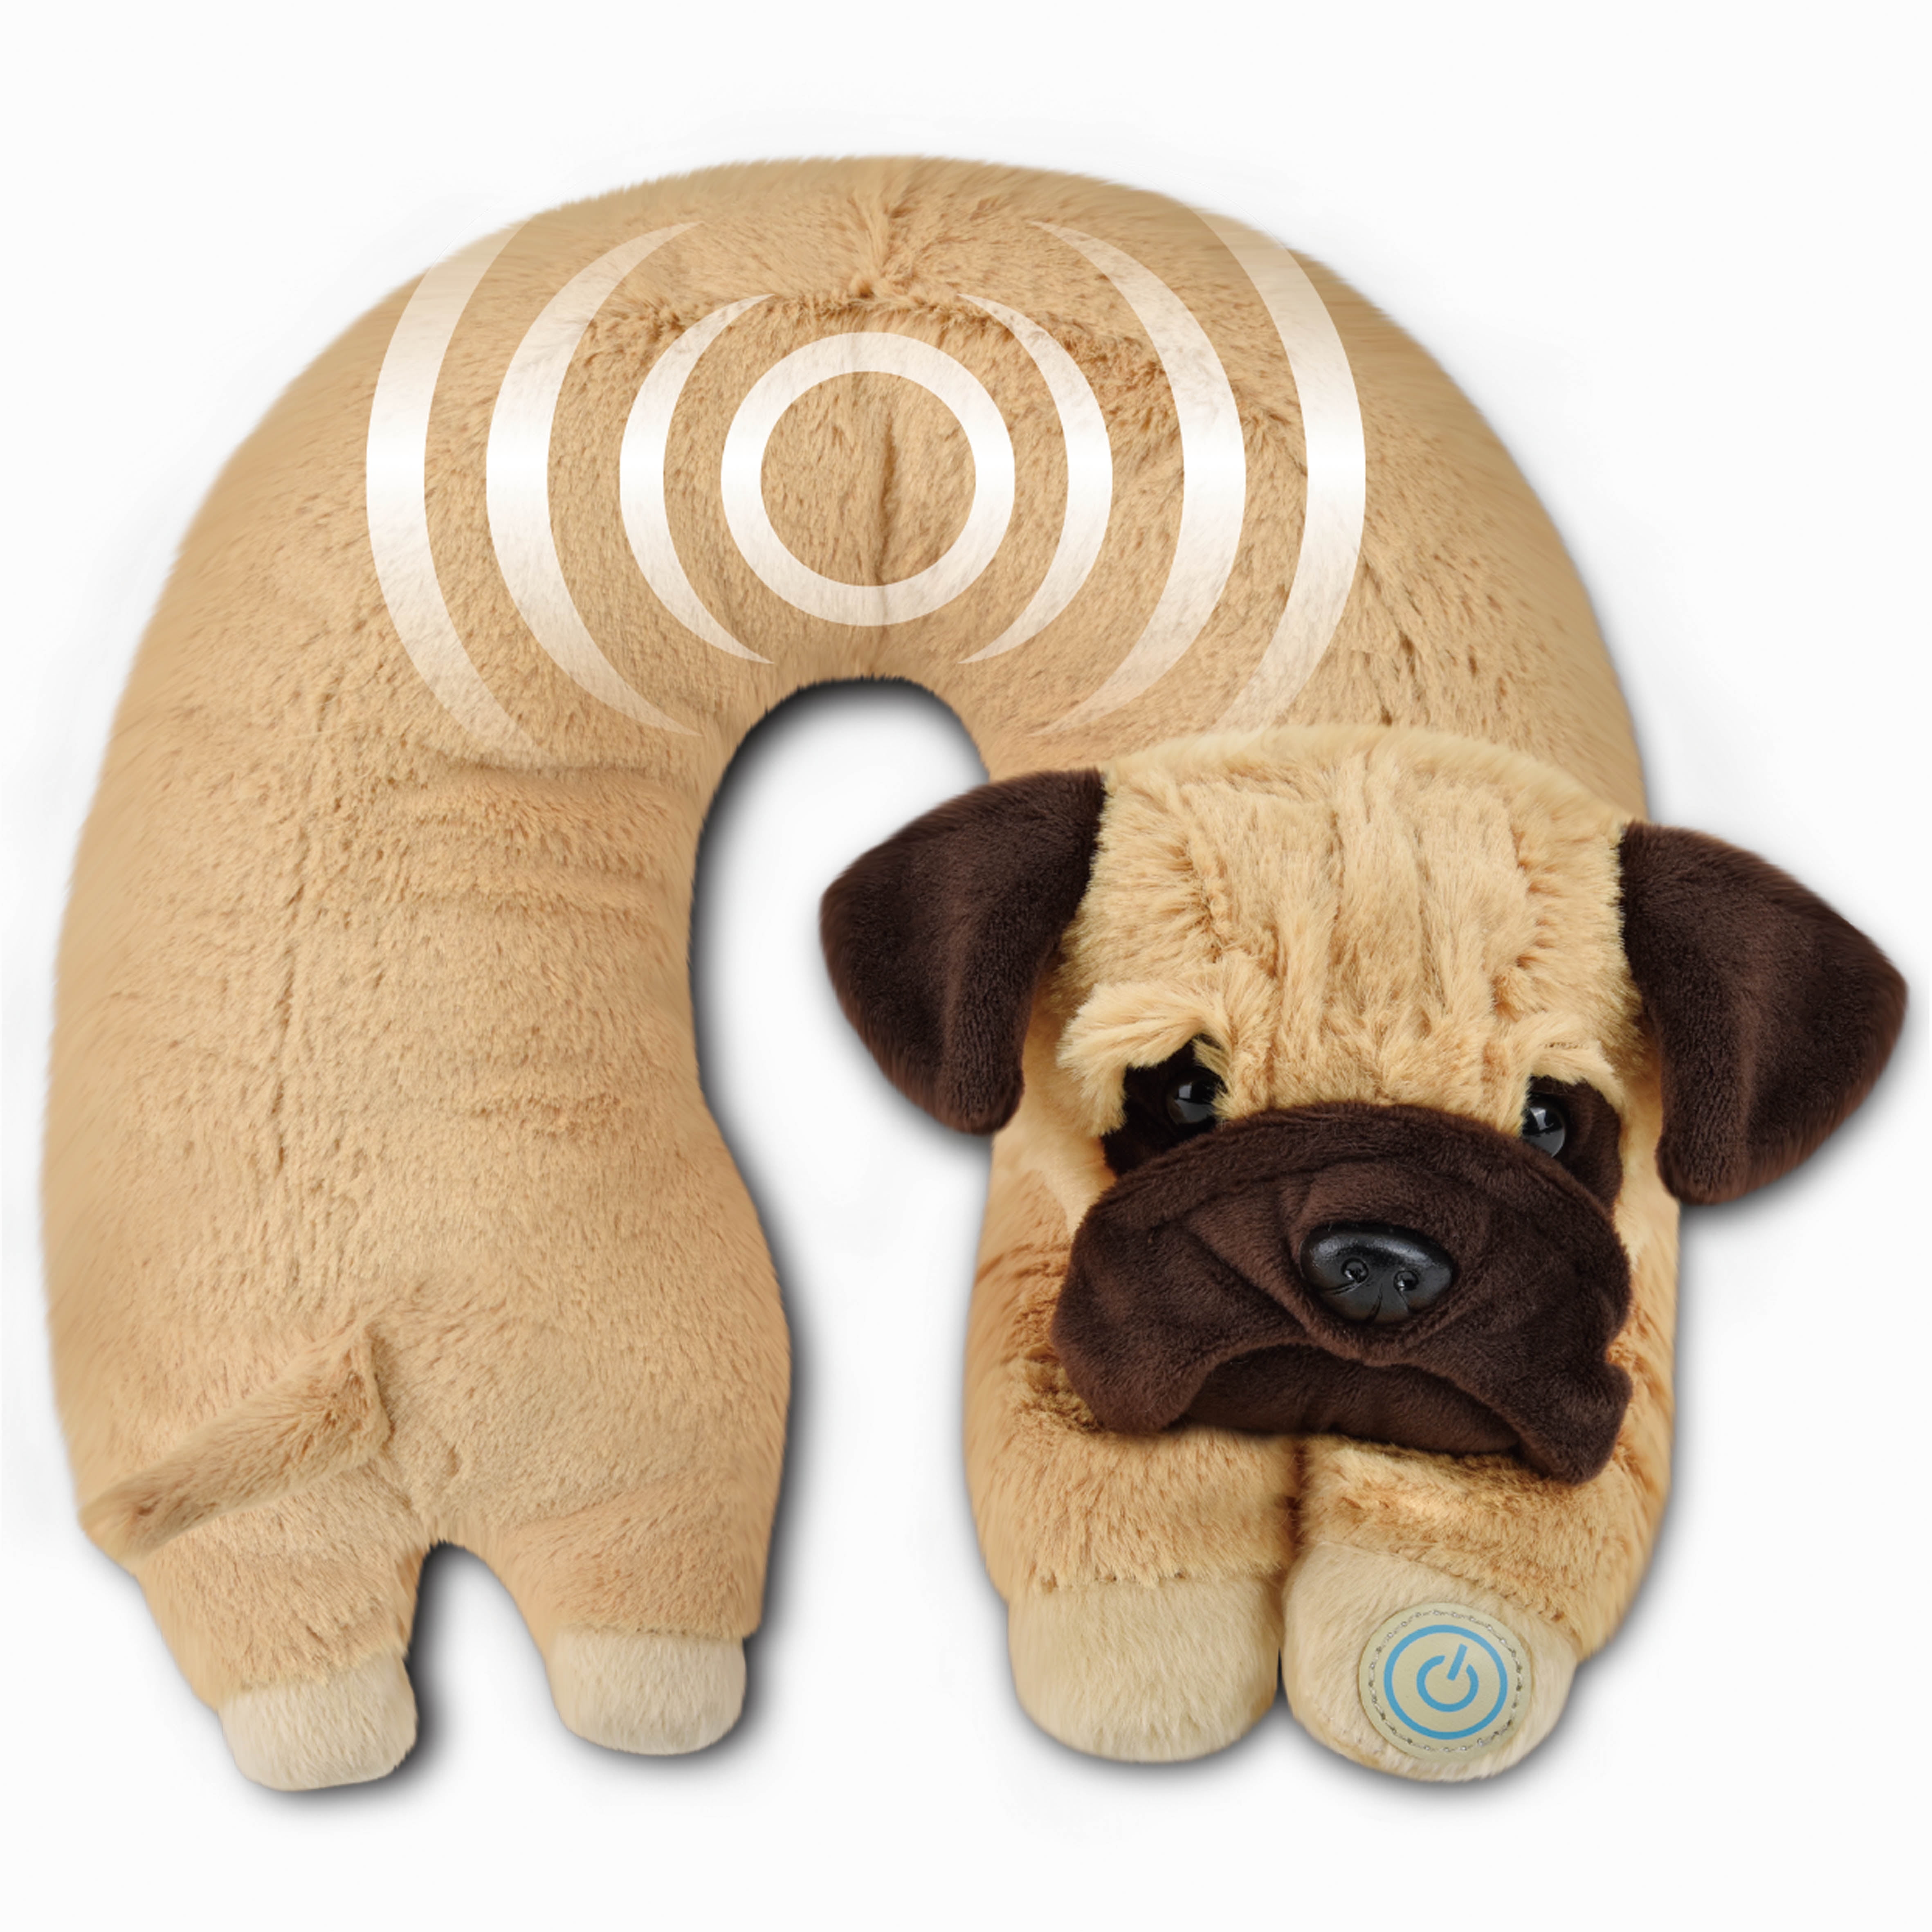 Health Touch Neck Massaging Massager Gift with Relaxing Vibration, Beige Pug Dog